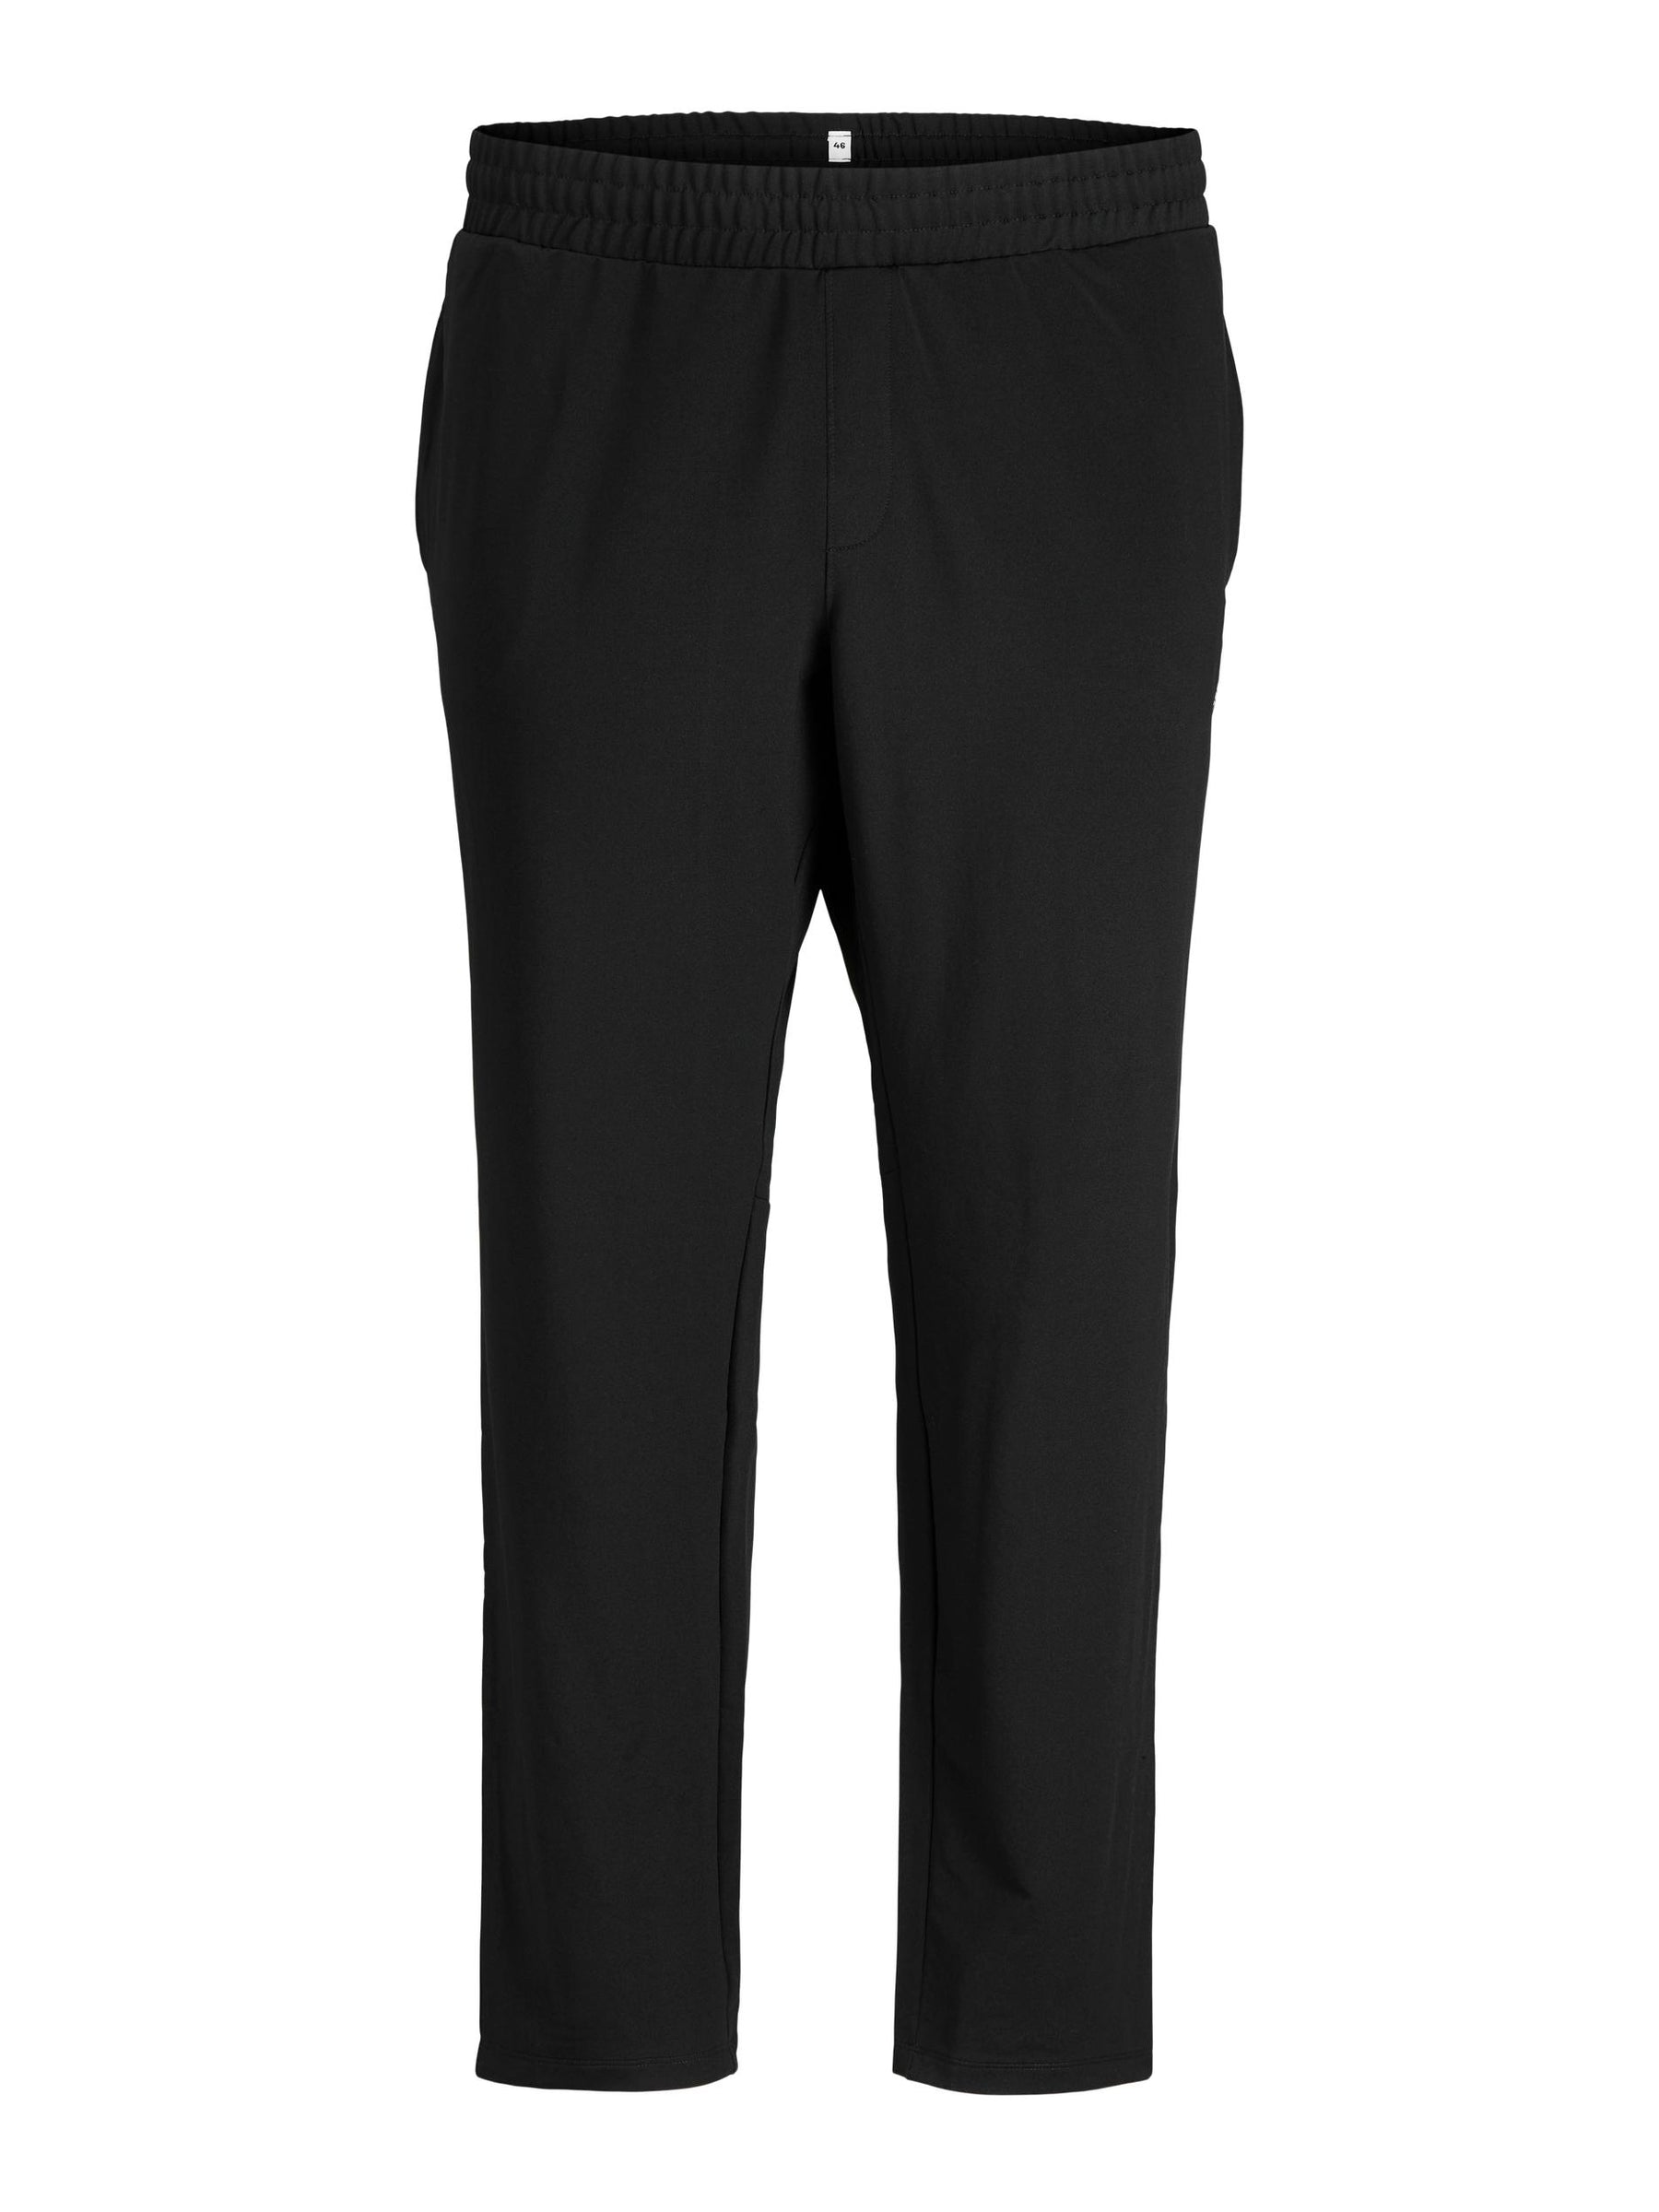 Casual Performance Sports Pants